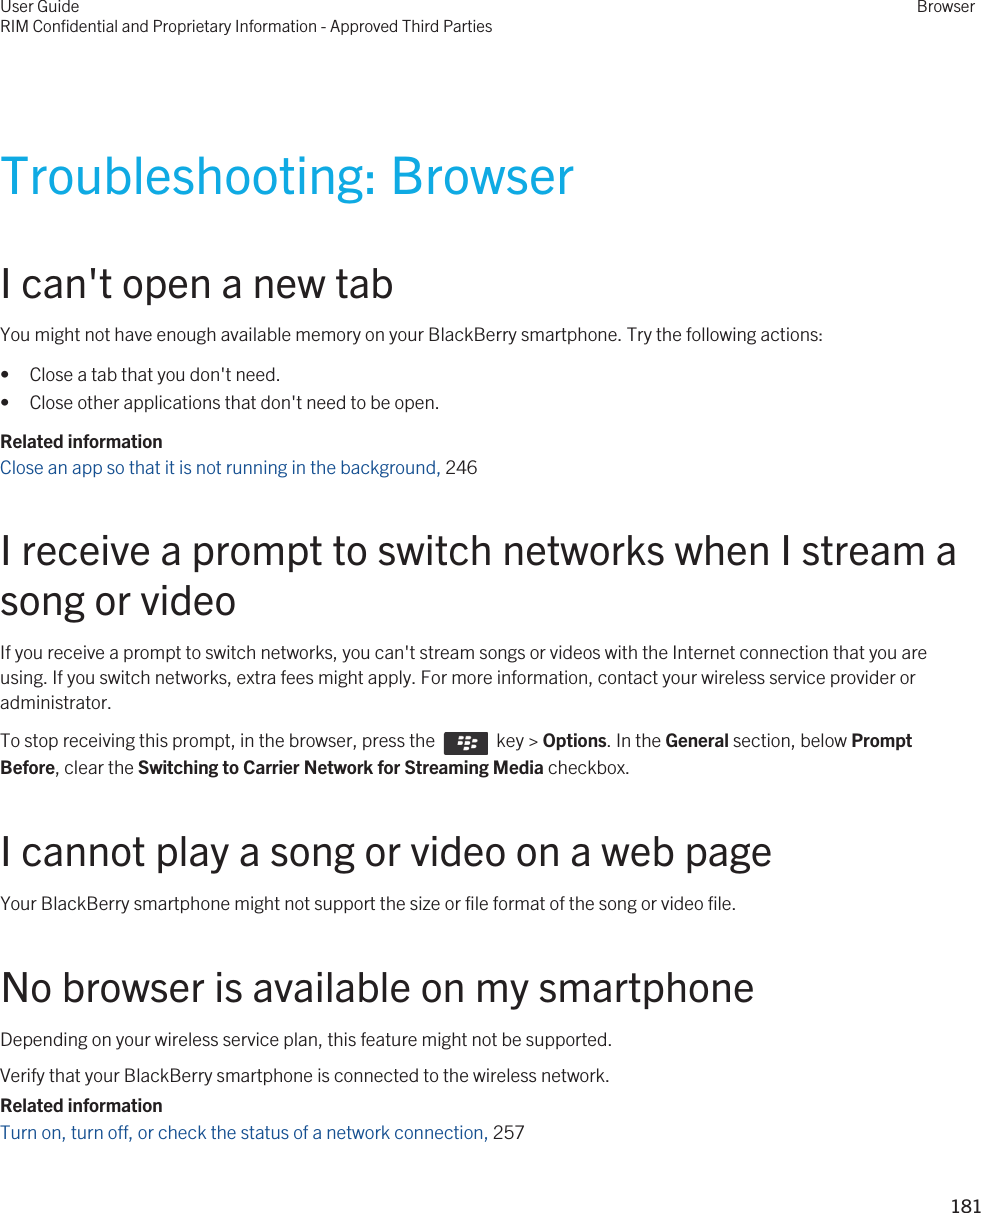 Troubleshooting: BrowserI can&apos;t open a new tabYou might not have enough available memory on your BlackBerry smartphone. Try the following actions:• Close a tab that you don&apos;t need.• Close other applications that don&apos;t need to be open.Related informationClose an app so that it is not running in the background, 246I receive a prompt to switch networks when I stream a song or videoIf you receive a prompt to switch networks, you can&apos;t stream songs or videos with the Internet connection that you are using. If you switch networks, extra fees might apply. For more information, contact your wireless service provider or administrator.To stop receiving this prompt, in the browser, press the    key &gt; Options. In the General section, below Prompt Before, clear the Switching to Carrier Network for Streaming Media checkbox.I cannot play a song or video on a web pageYour BlackBerry smartphone might not support the size or file format of the song or video file.No browser is available on my smartphoneDepending on your wireless service plan, this feature might not be supported.Verify that your BlackBerry smartphone is connected to the wireless network.Related informationTurn on, turn off, or check the status of a network connection, 257User GuideRIM Confidential and Proprietary Information - Approved Third PartiesBrowser181 